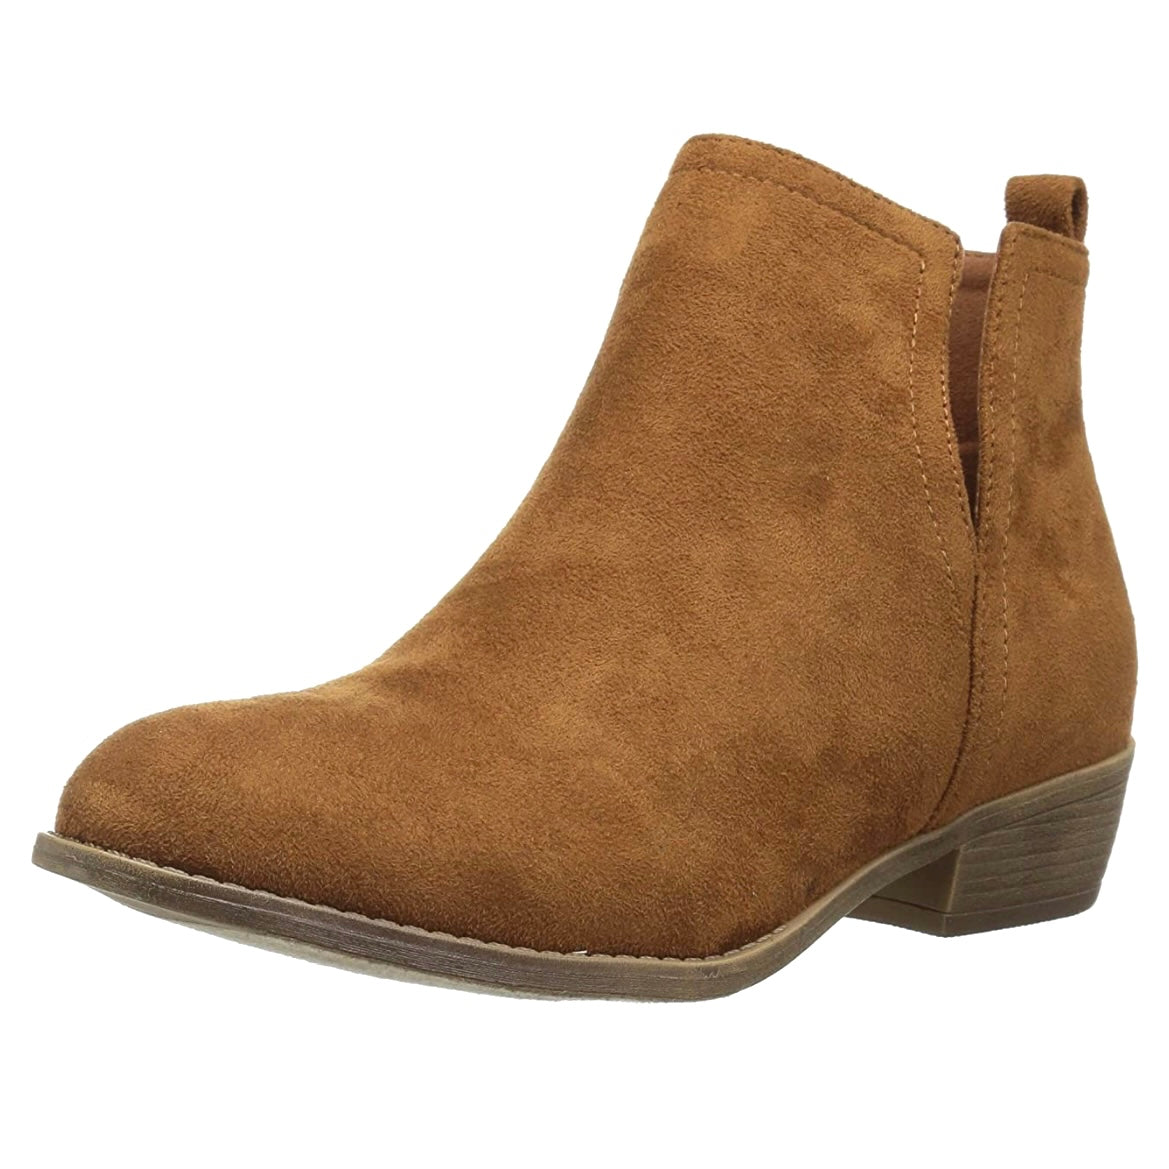 RIMI Camel Booties Women's Ankle Boots